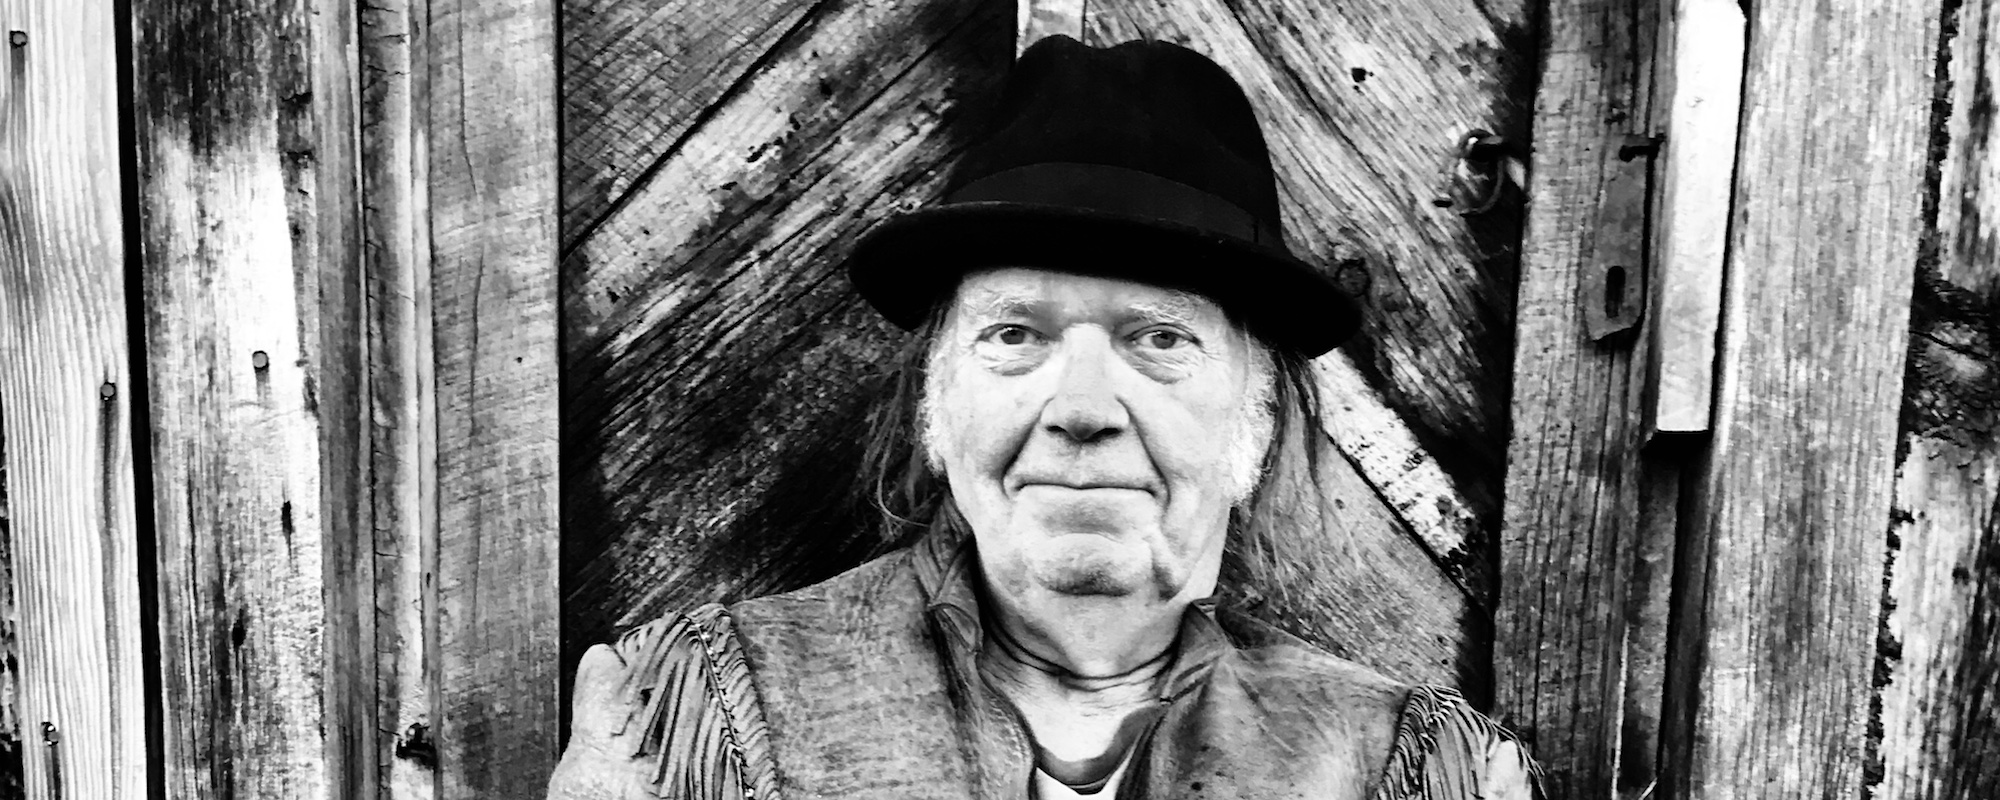 Neil Young to Reissue ‘Harvest’ for 50th Anniversary